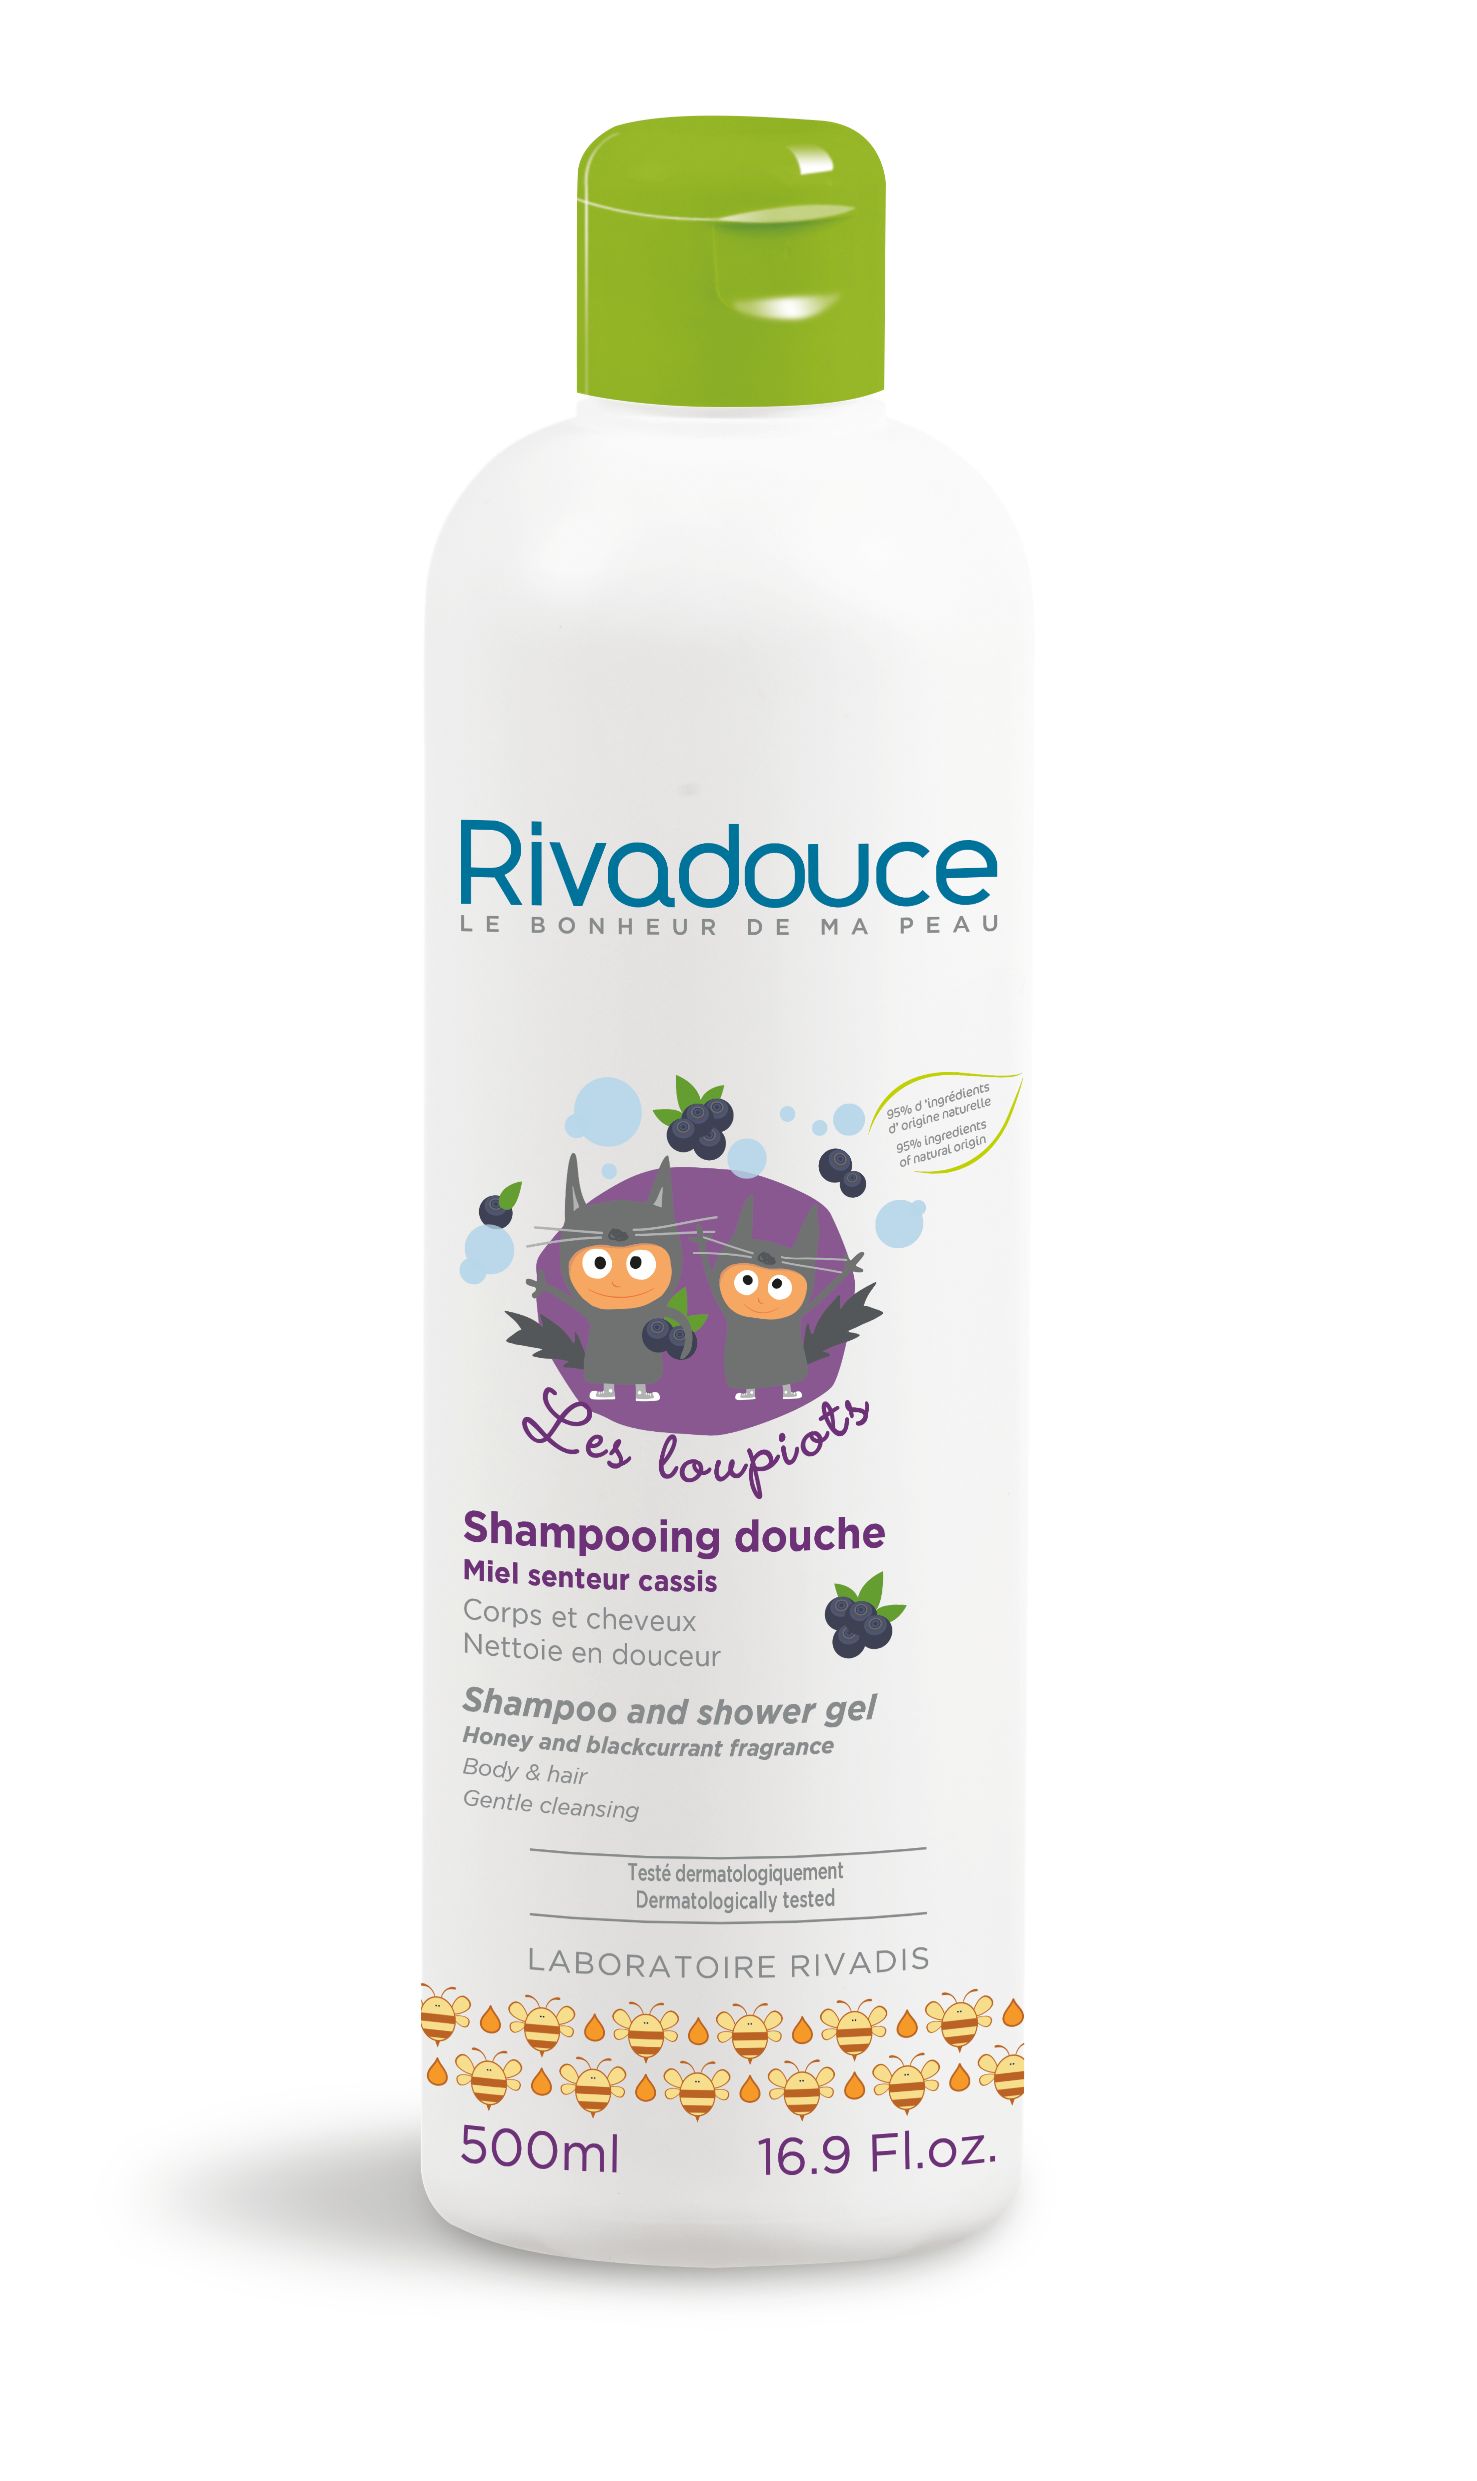 RIVADOUCE LOUPIOTS Shampooing Douche Miel et Cassis (Honey and Blackcurrent Shampoo and Body Wash) - 500ml